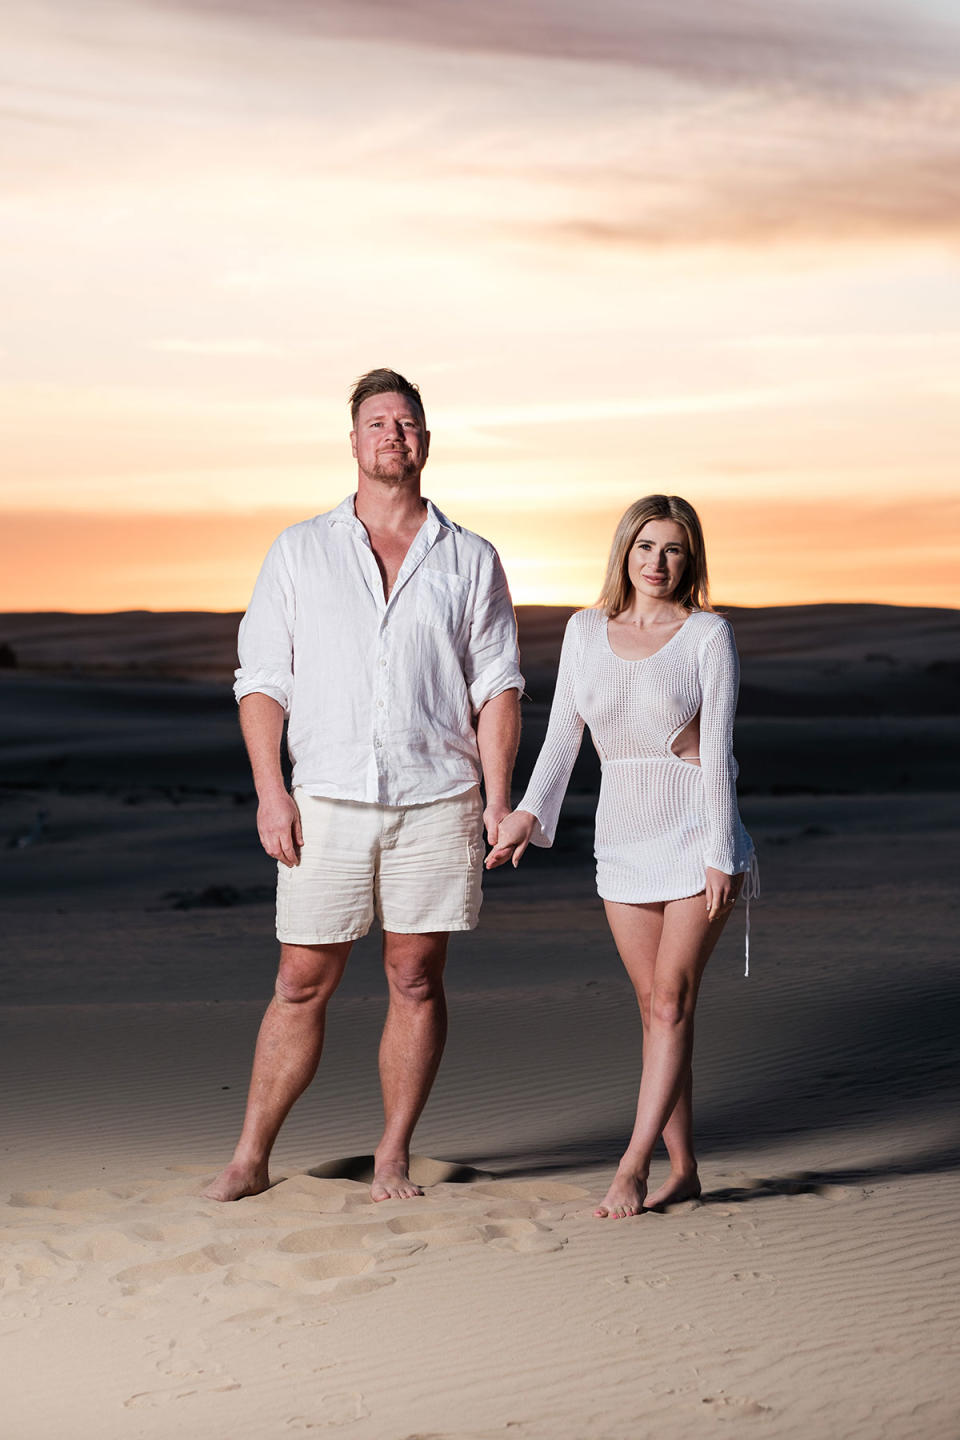 Dean Wells and Aimee Woolley posing on a beach in front of a sunset